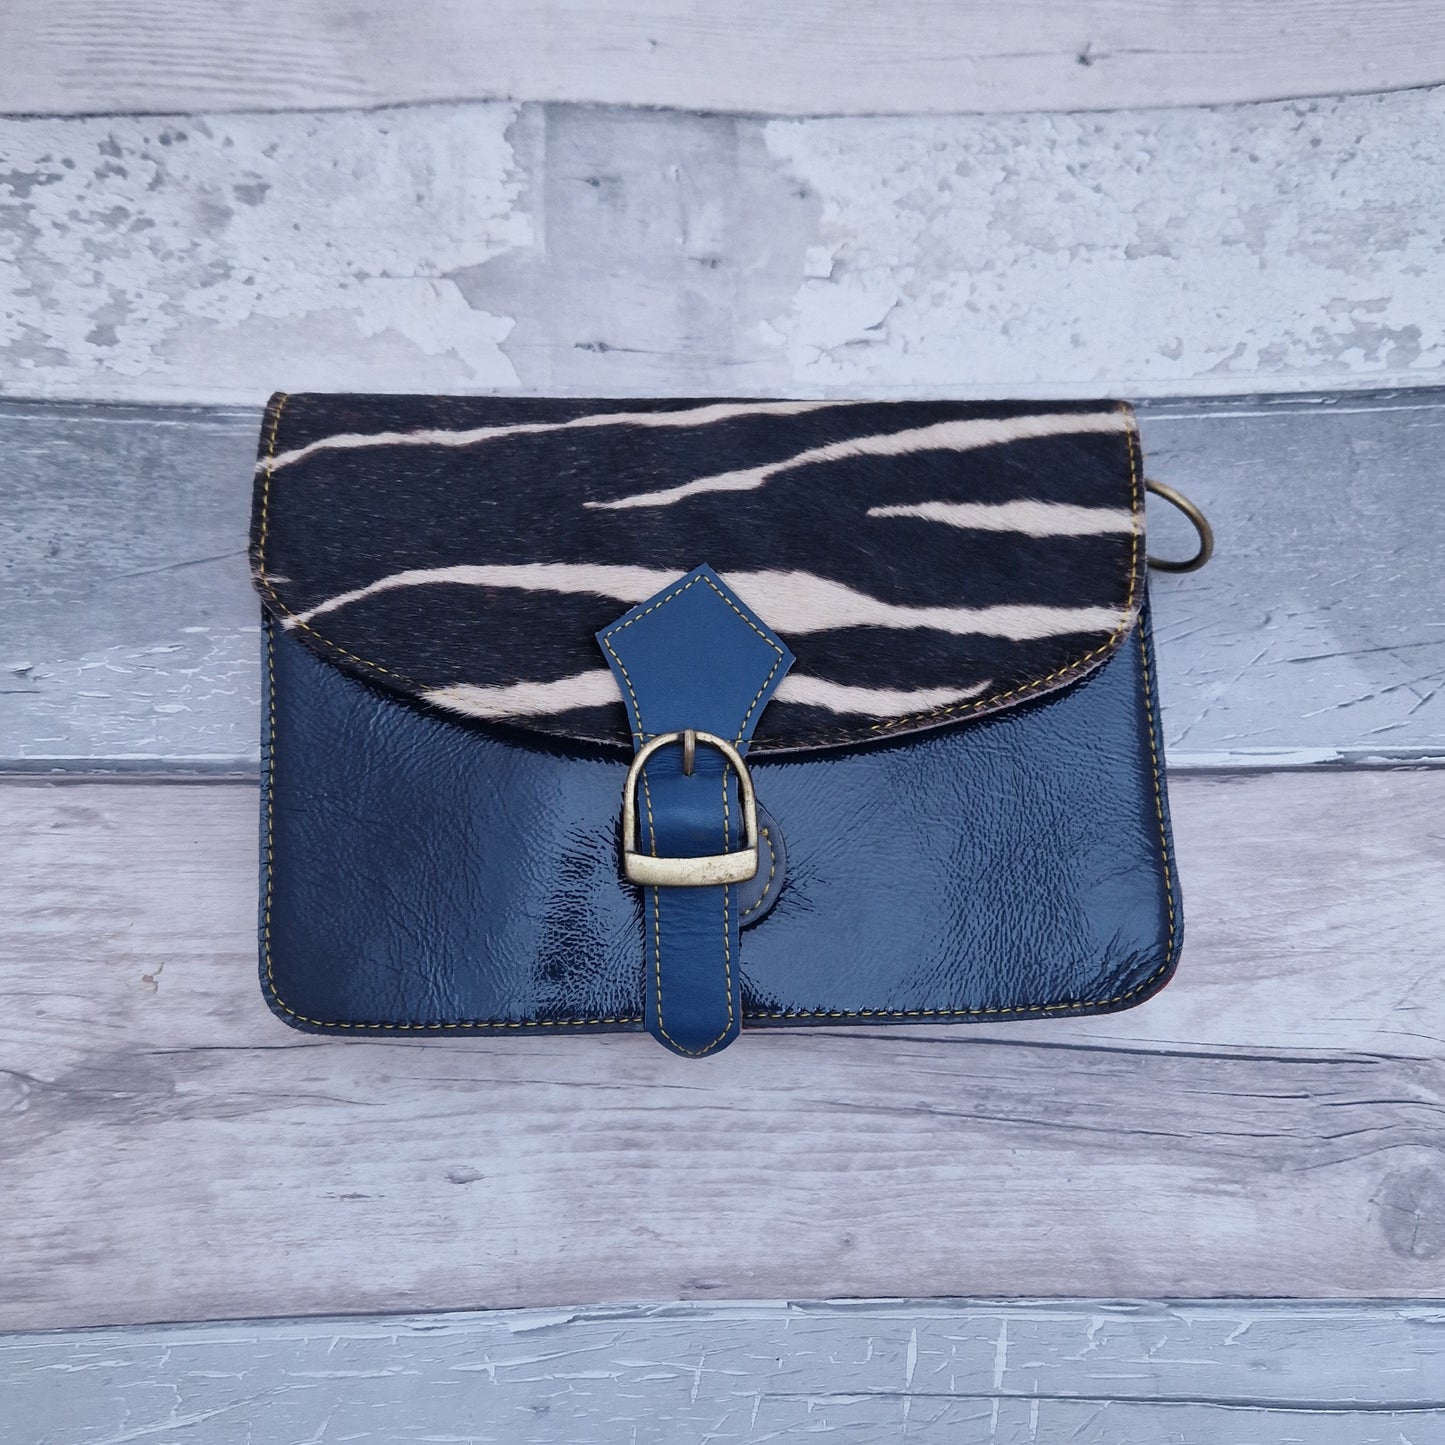 Navy leather bag with a textured panel in Zebra print.